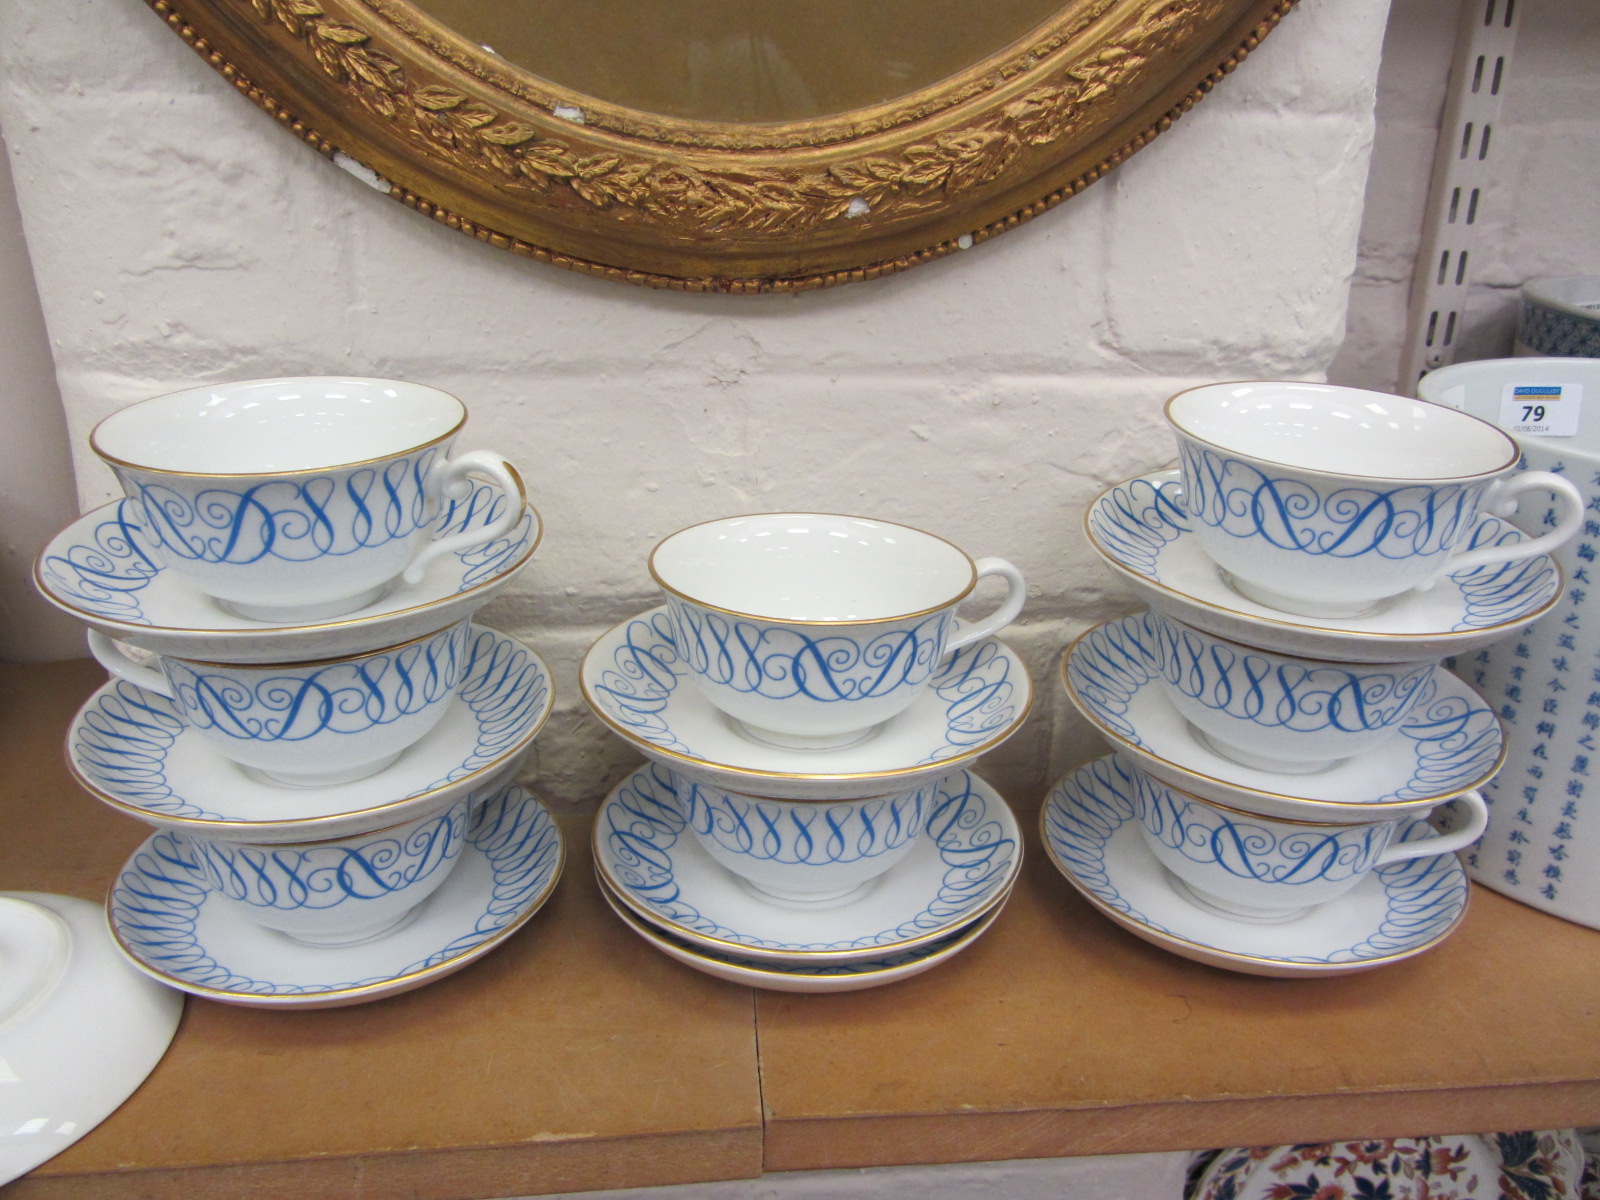 Set of 8 1950's 'Dorchester Hotel' Royal Worcester tea cups and 10 saucers